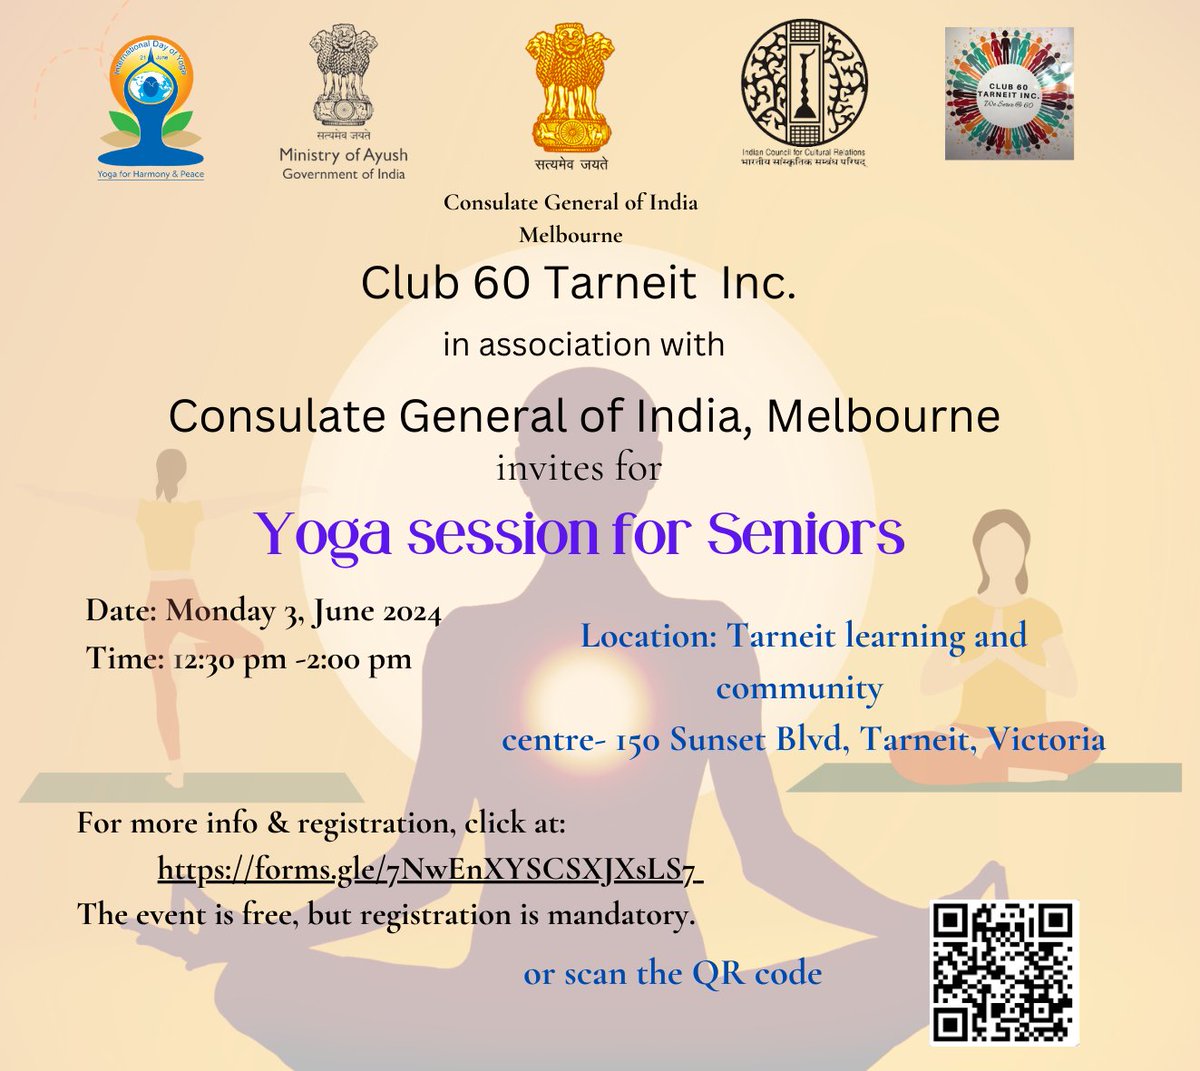 'Yoga for Seniors'' #InternationalDayOfYoga2024
Club 60 Tarneit in association with the Consulate  invites for a Yoga session for Seniors.
📅: 3 June 2024
⏲️: 12:30pm-2:00pm
🏢:- 150 Sunset Blvd, Tarneit,Victoria
Join for a rejuvenating Yoga session.
More info 👇